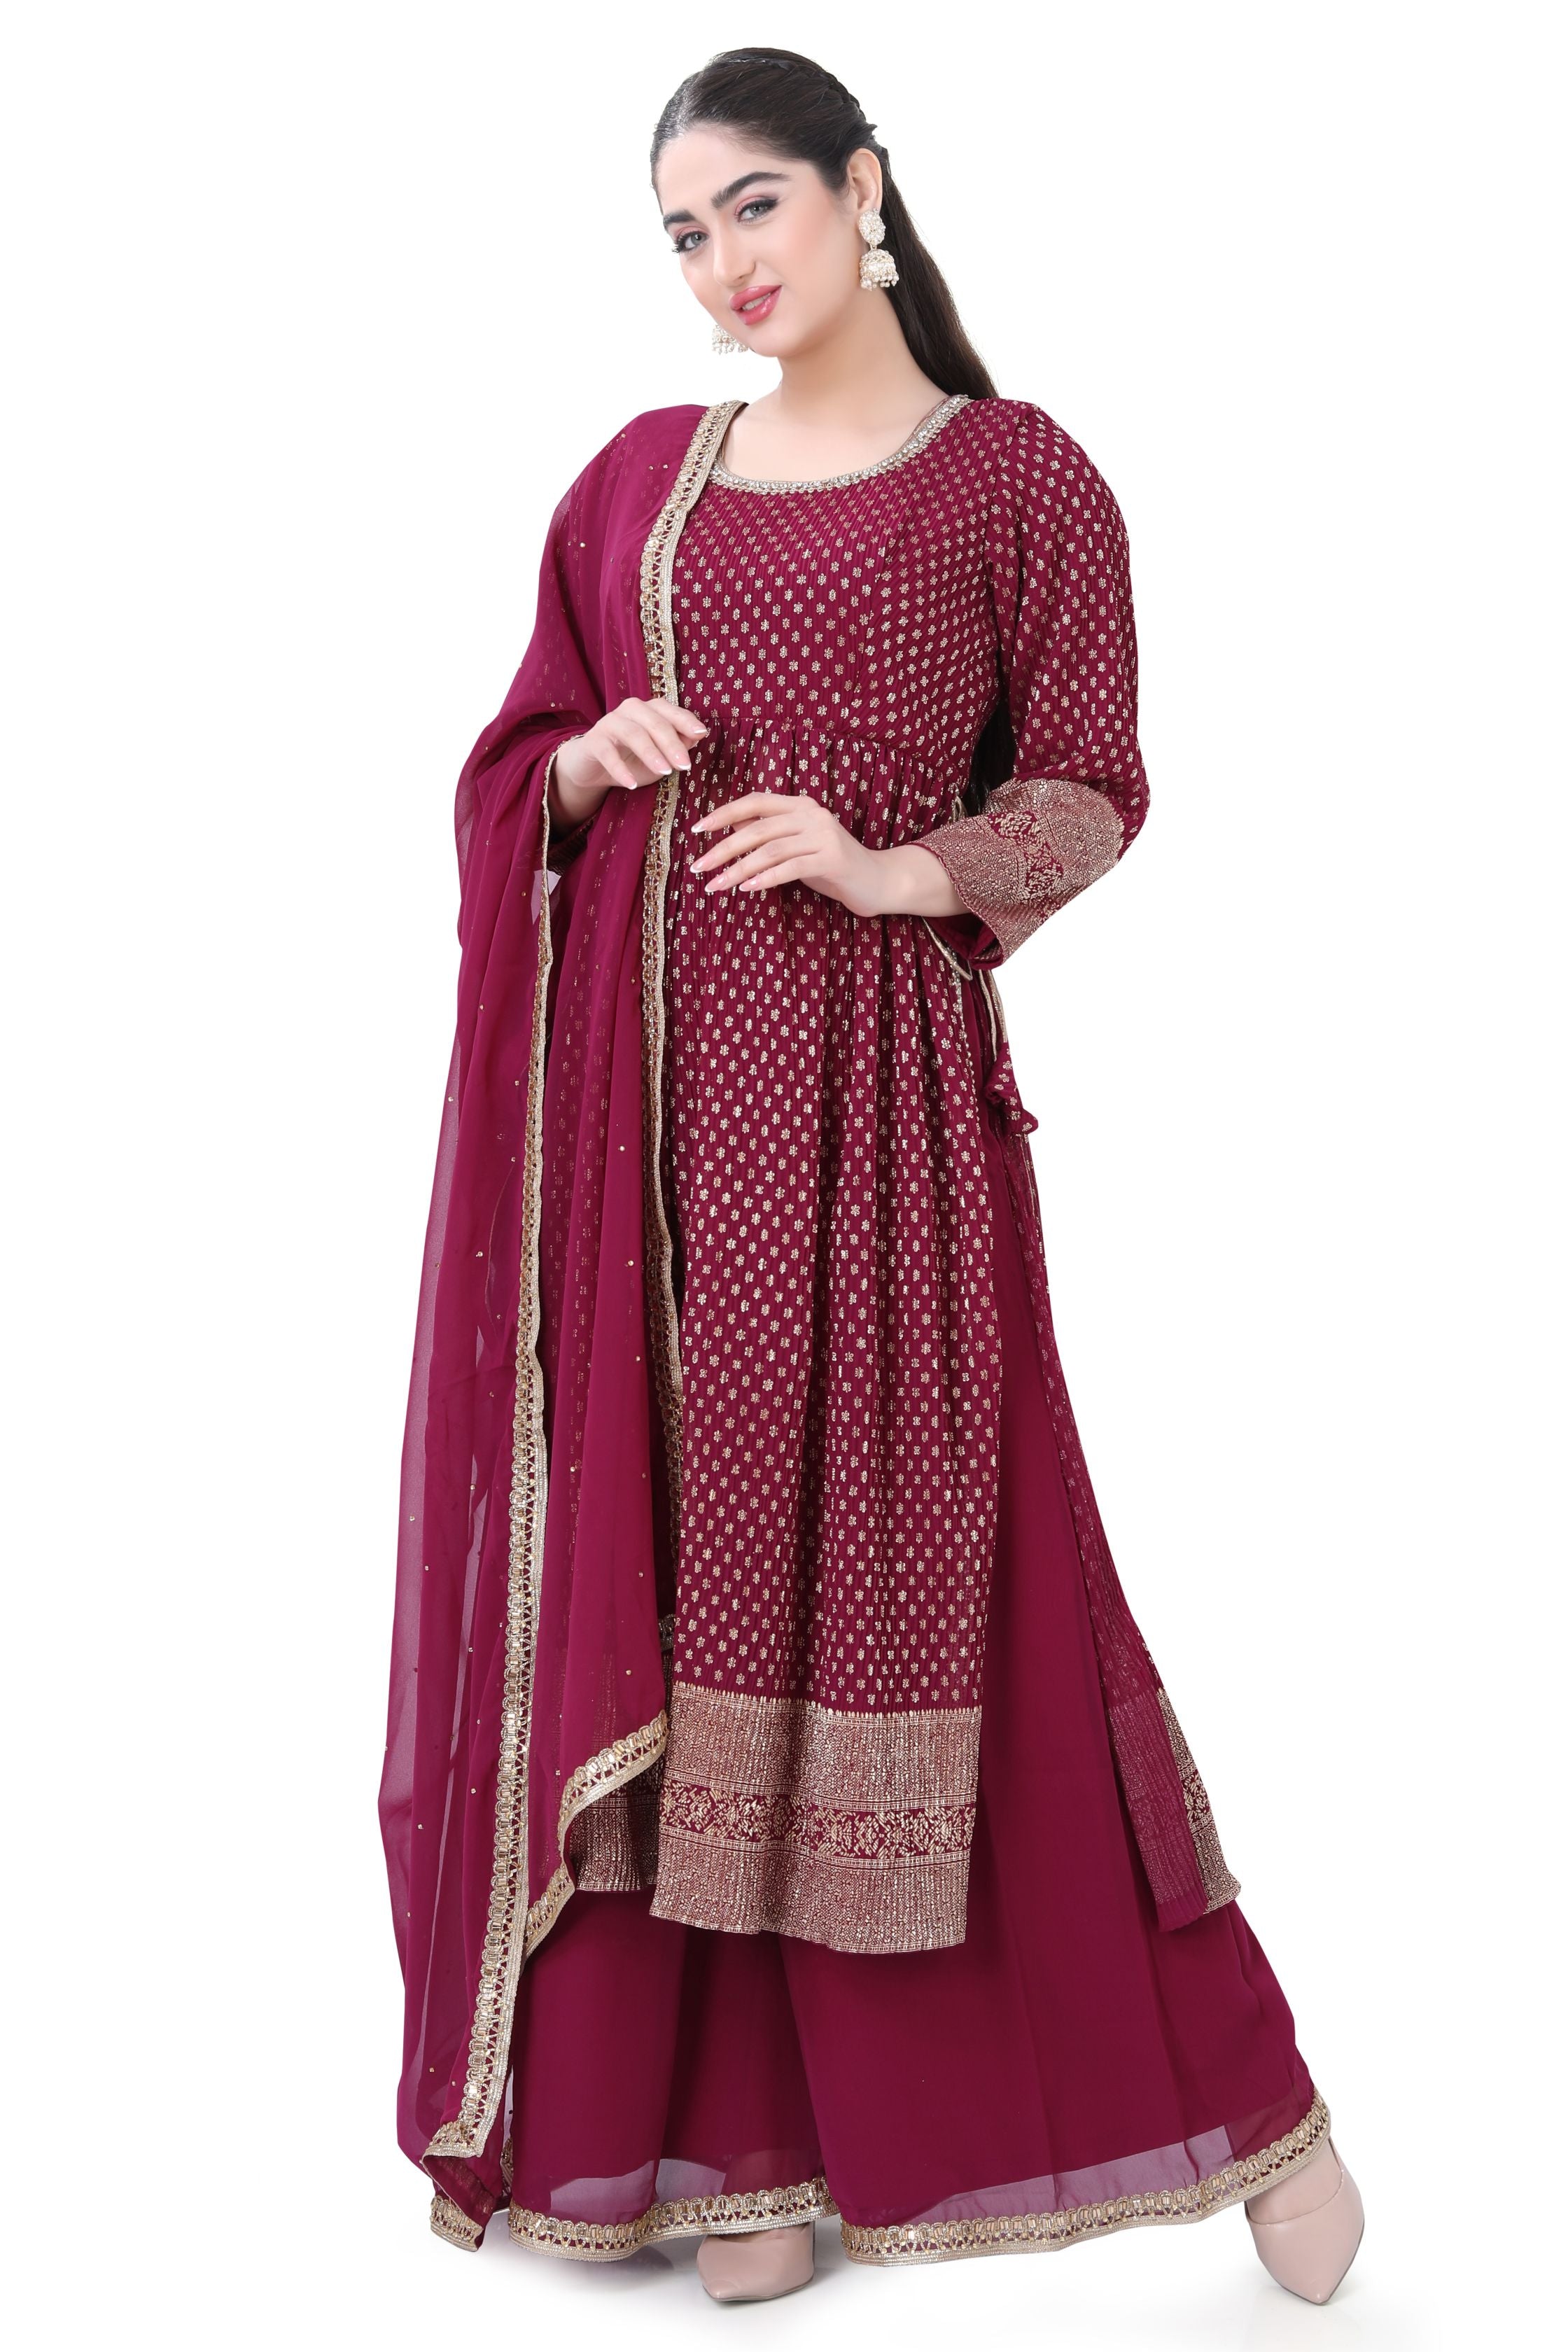 Magenta Floor Length Anarkali Dress in Georgette Fabric With foil Butti